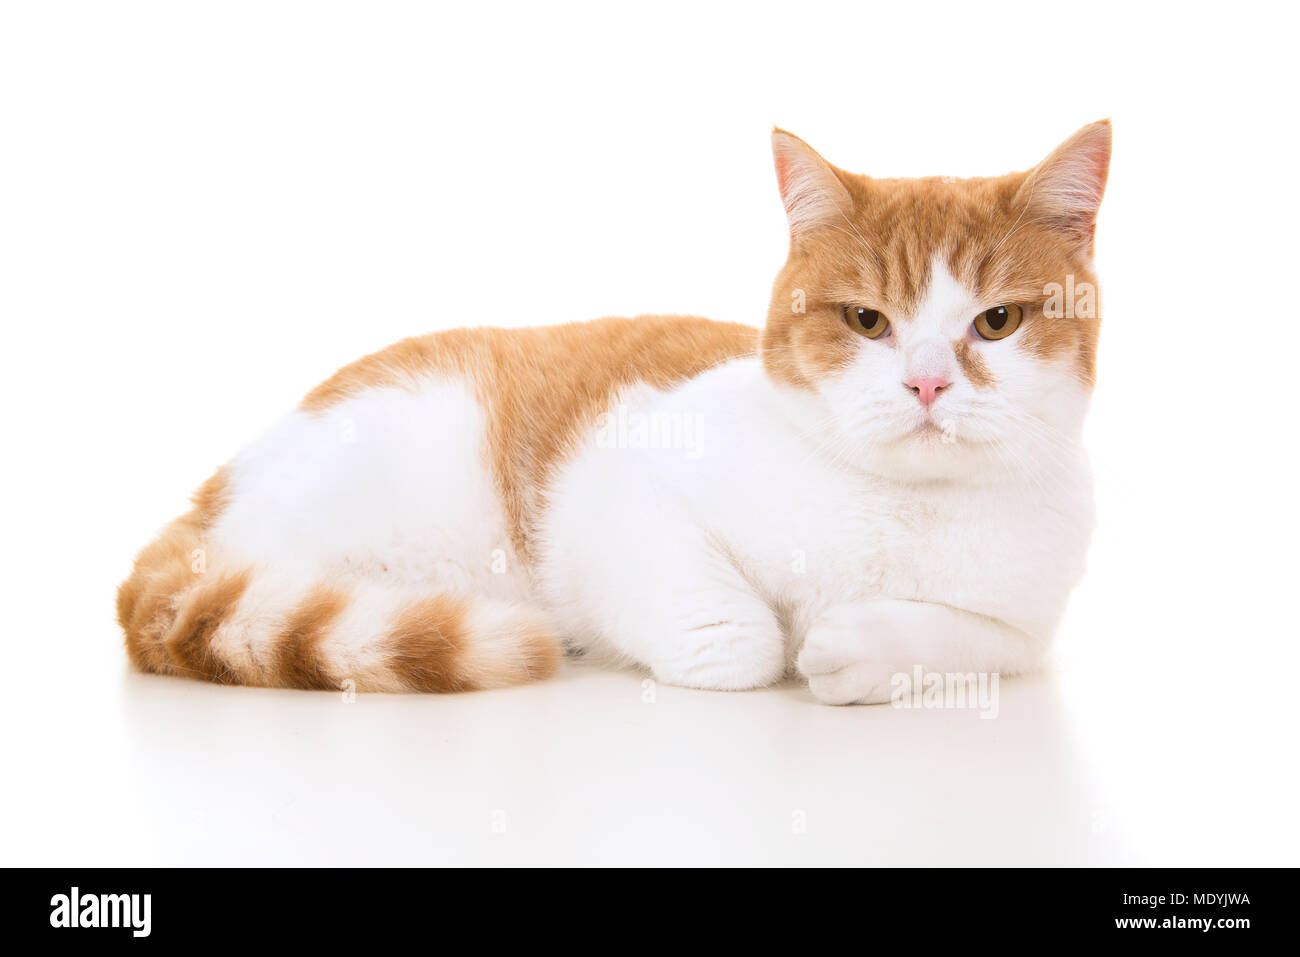 Red and white british shorthair cat seen from the side lying down on a white background Stock Photo